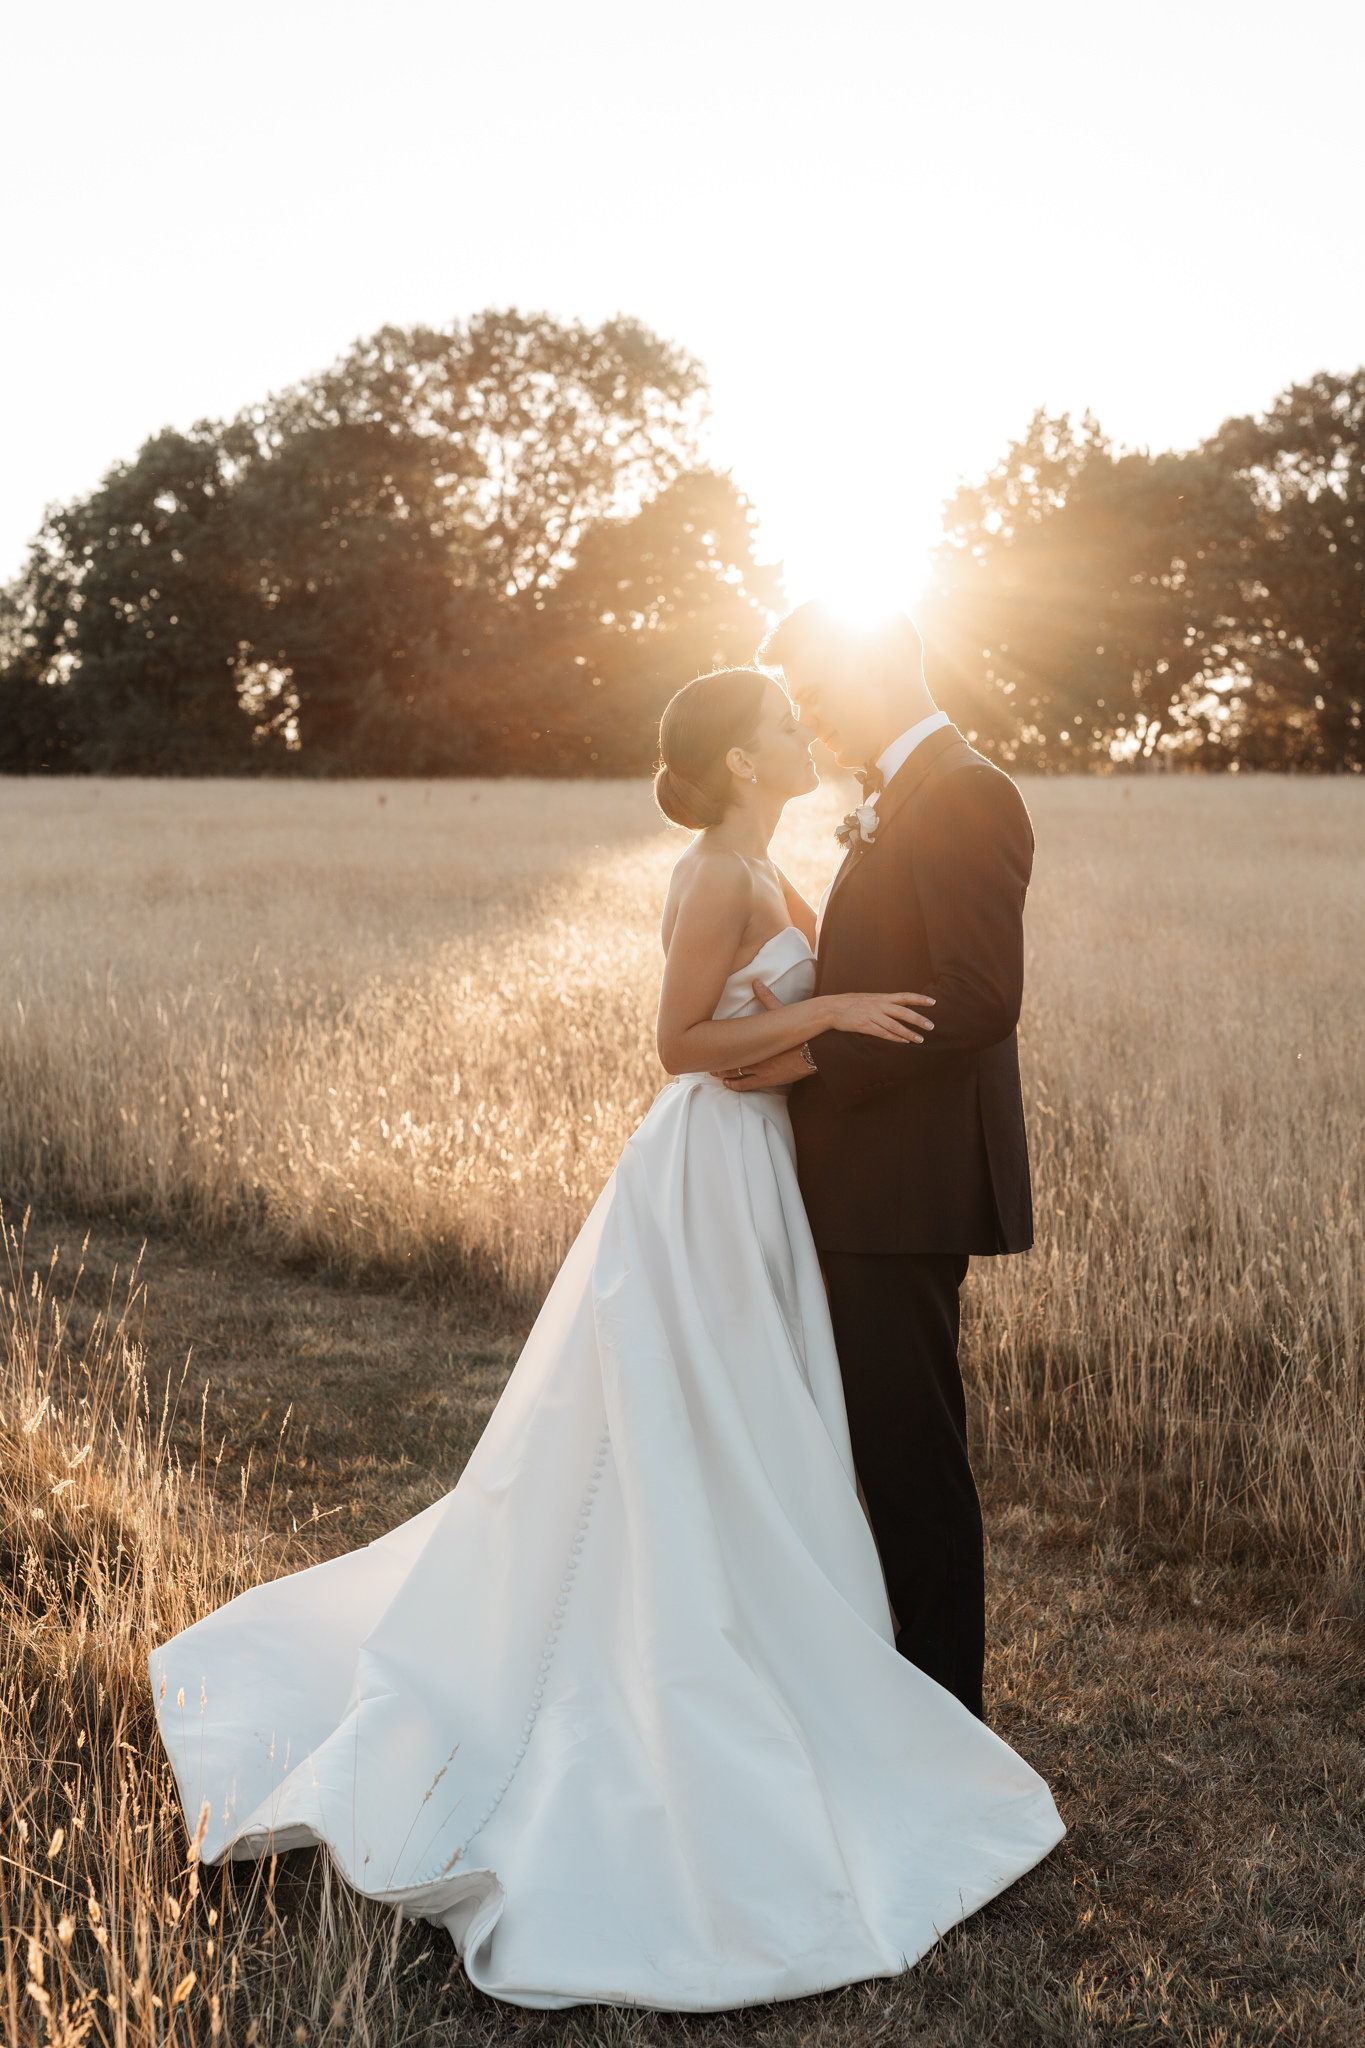 sunset wedding photography at silchester farm